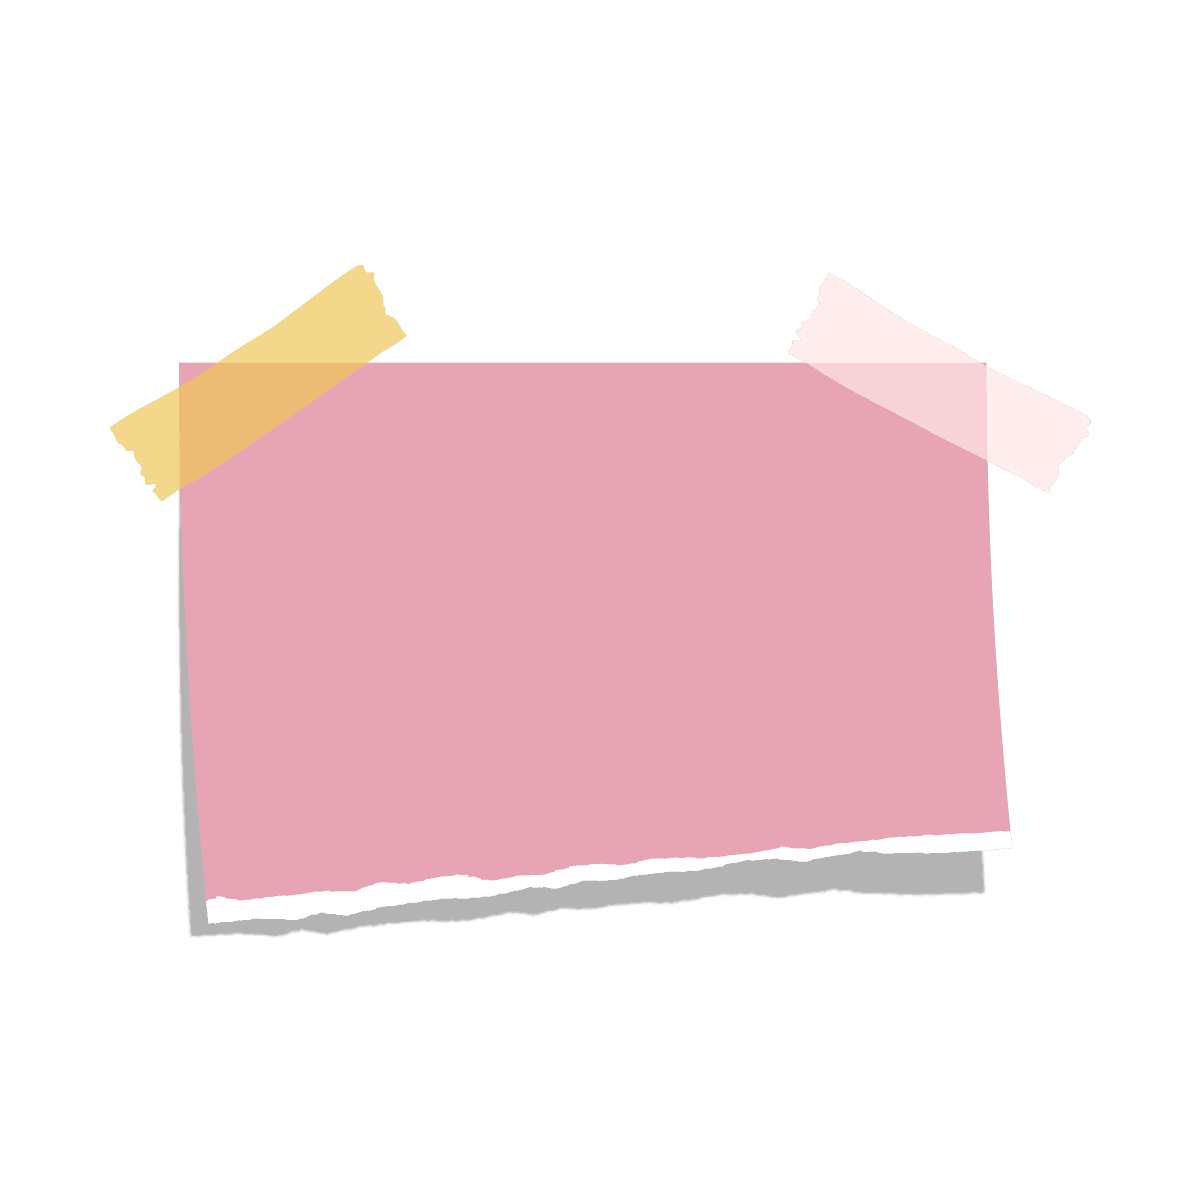 pastel sticky notes for digital planners - minimalist torn paper style with colorful tape accents